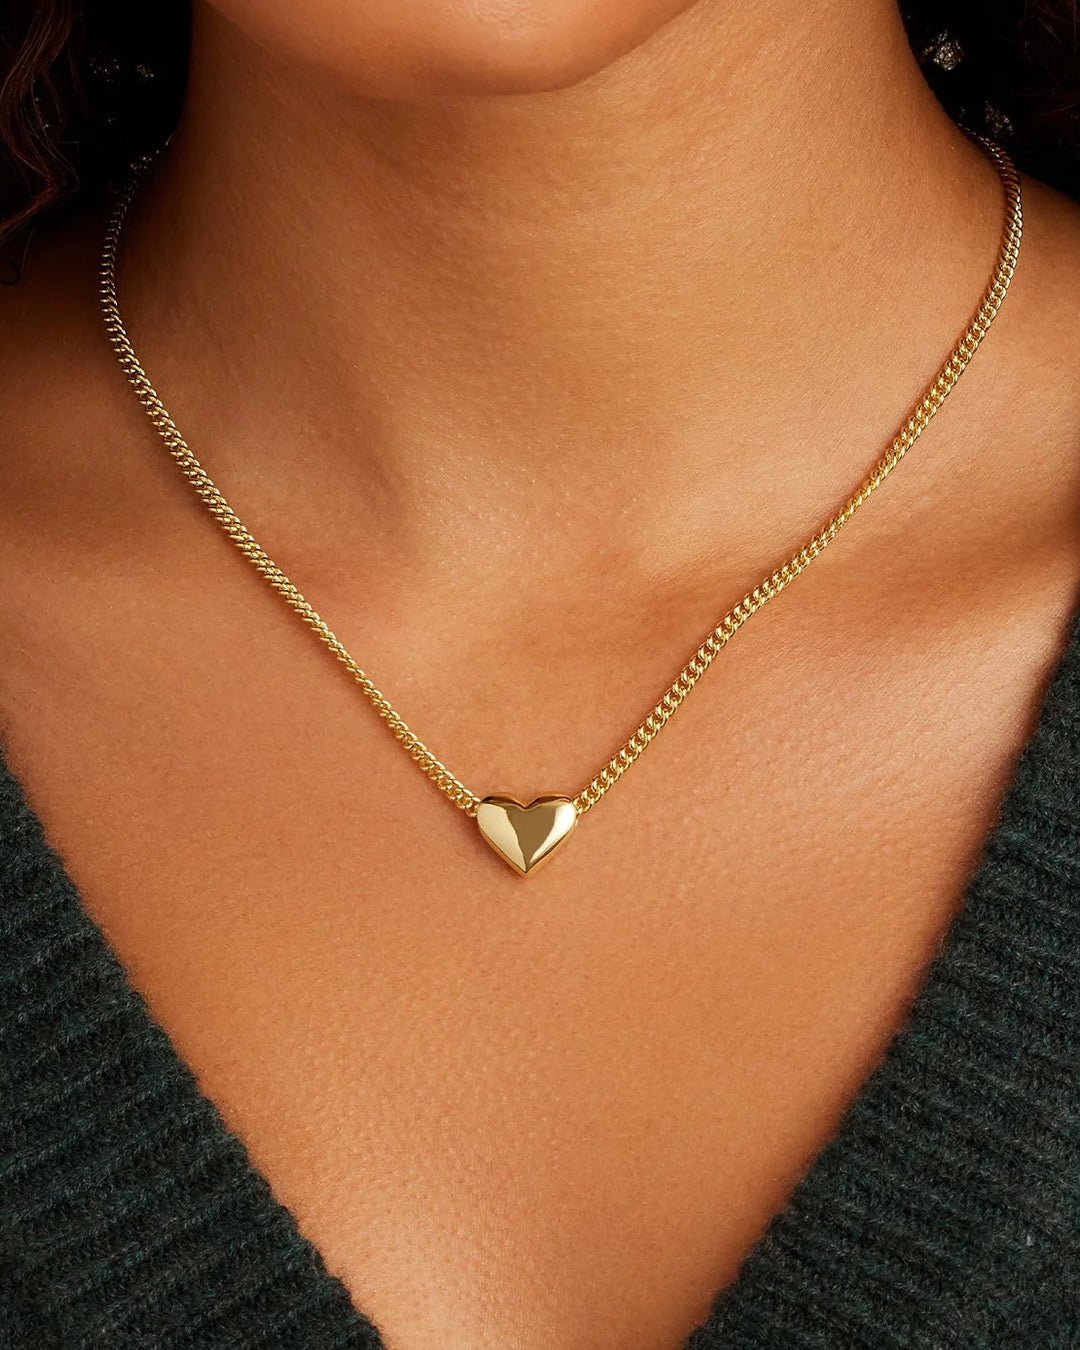 Lou Heart Charm Necklace in Gold Plated, Women's by Gorjana